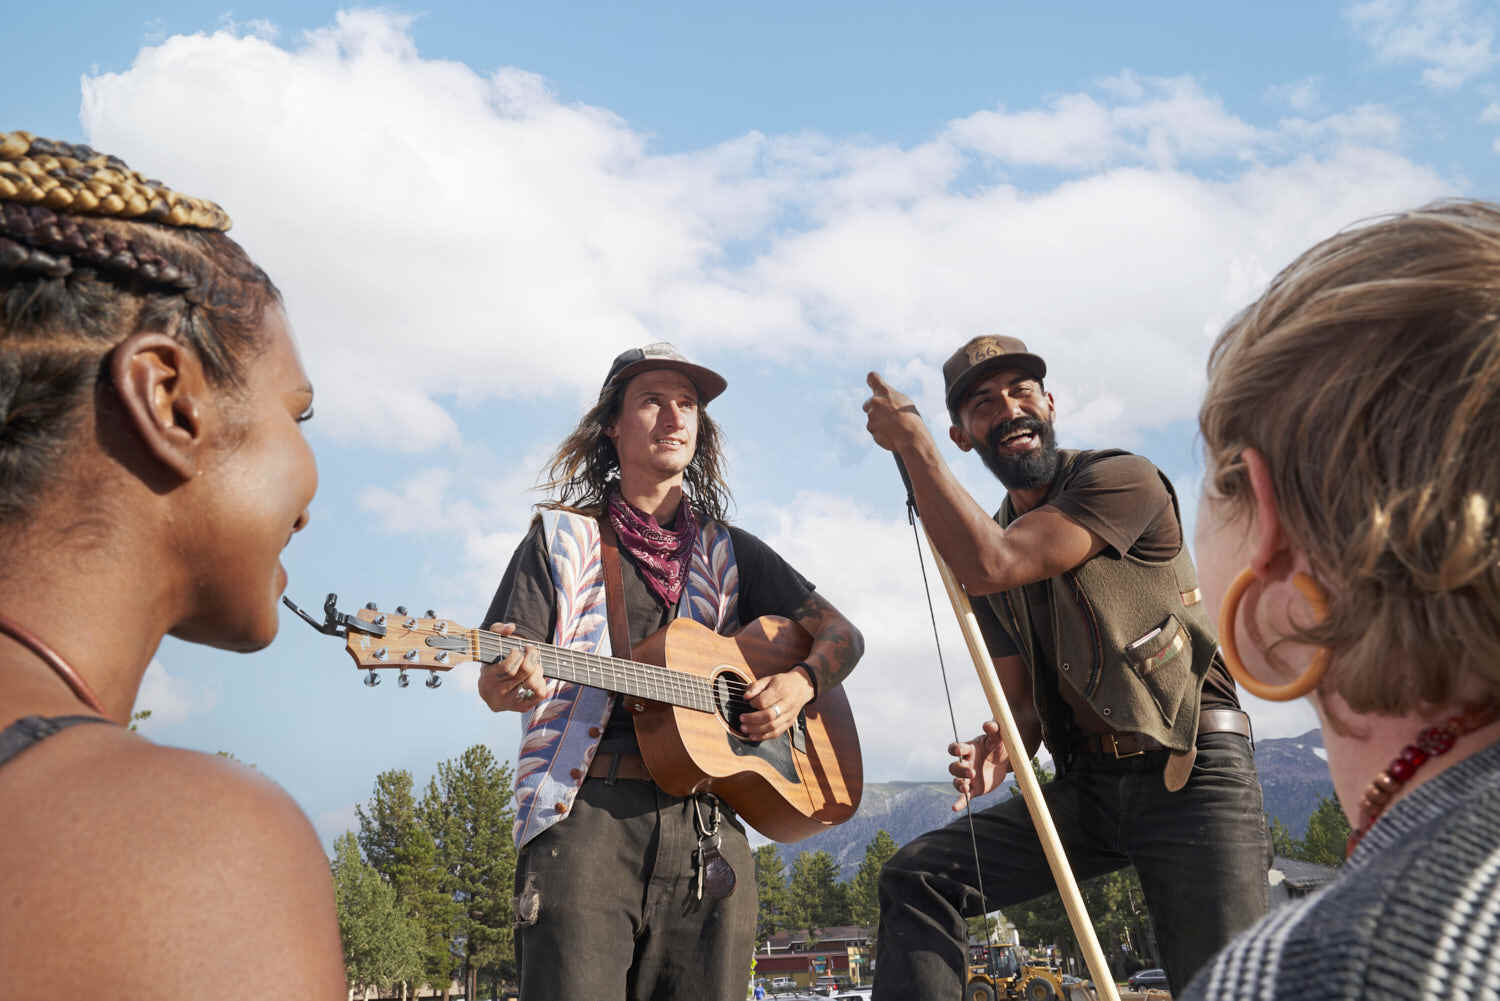 Musicians showcase talent on a roadside stage, playing instruments for passing audiences.